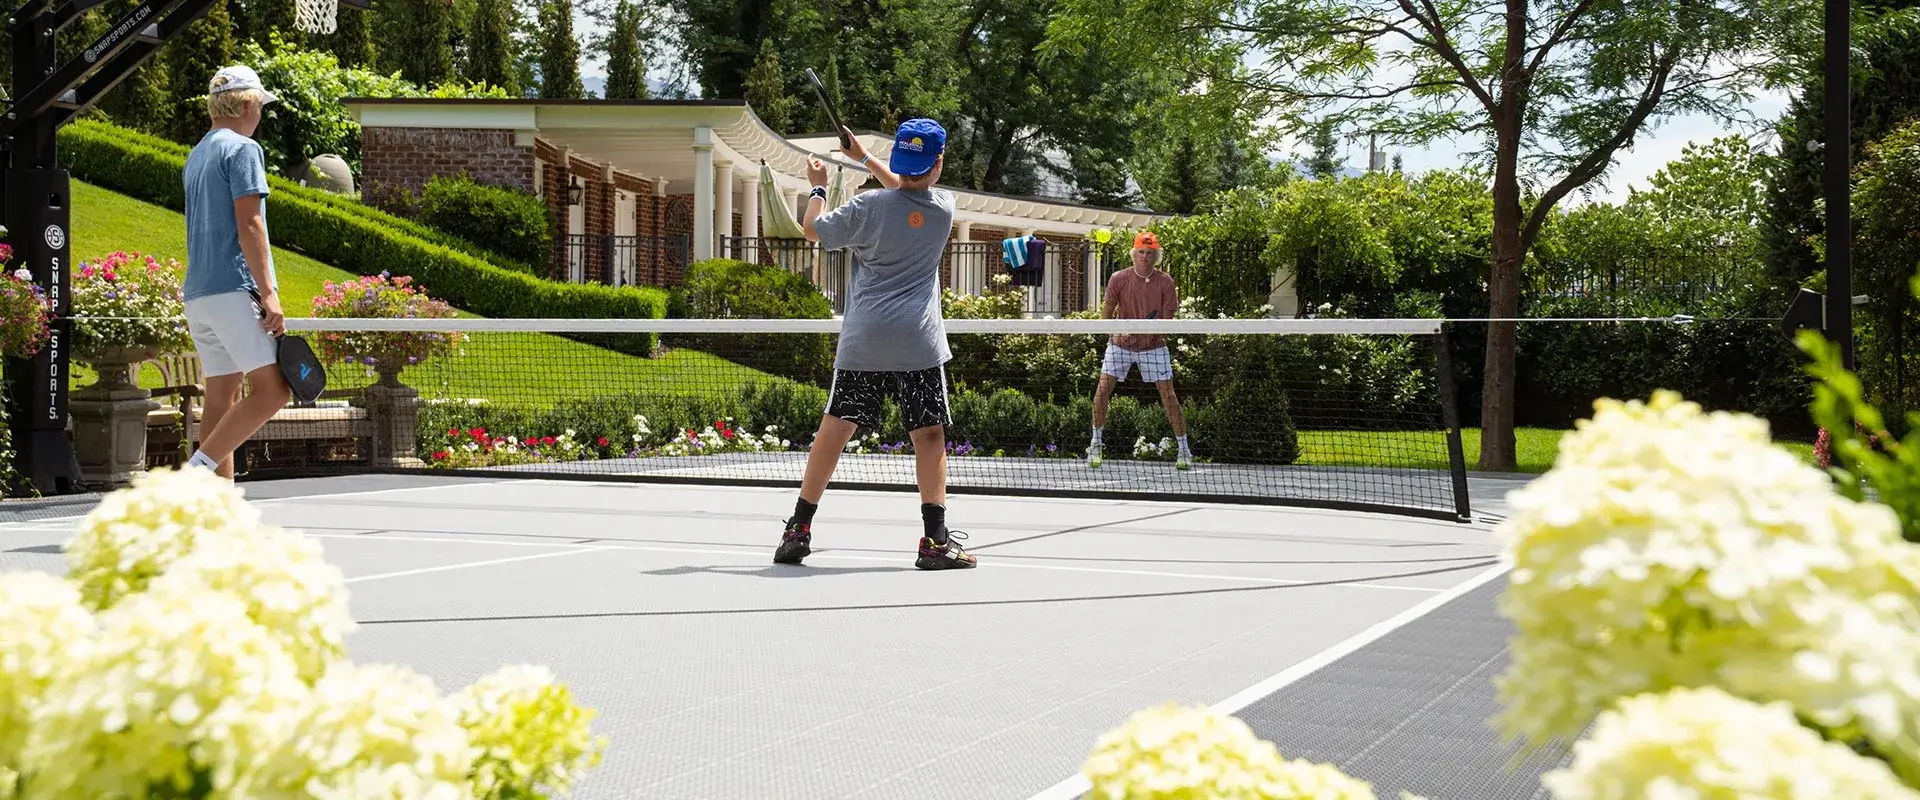 Brothers playing a game of pickleball cutthroat on their home court